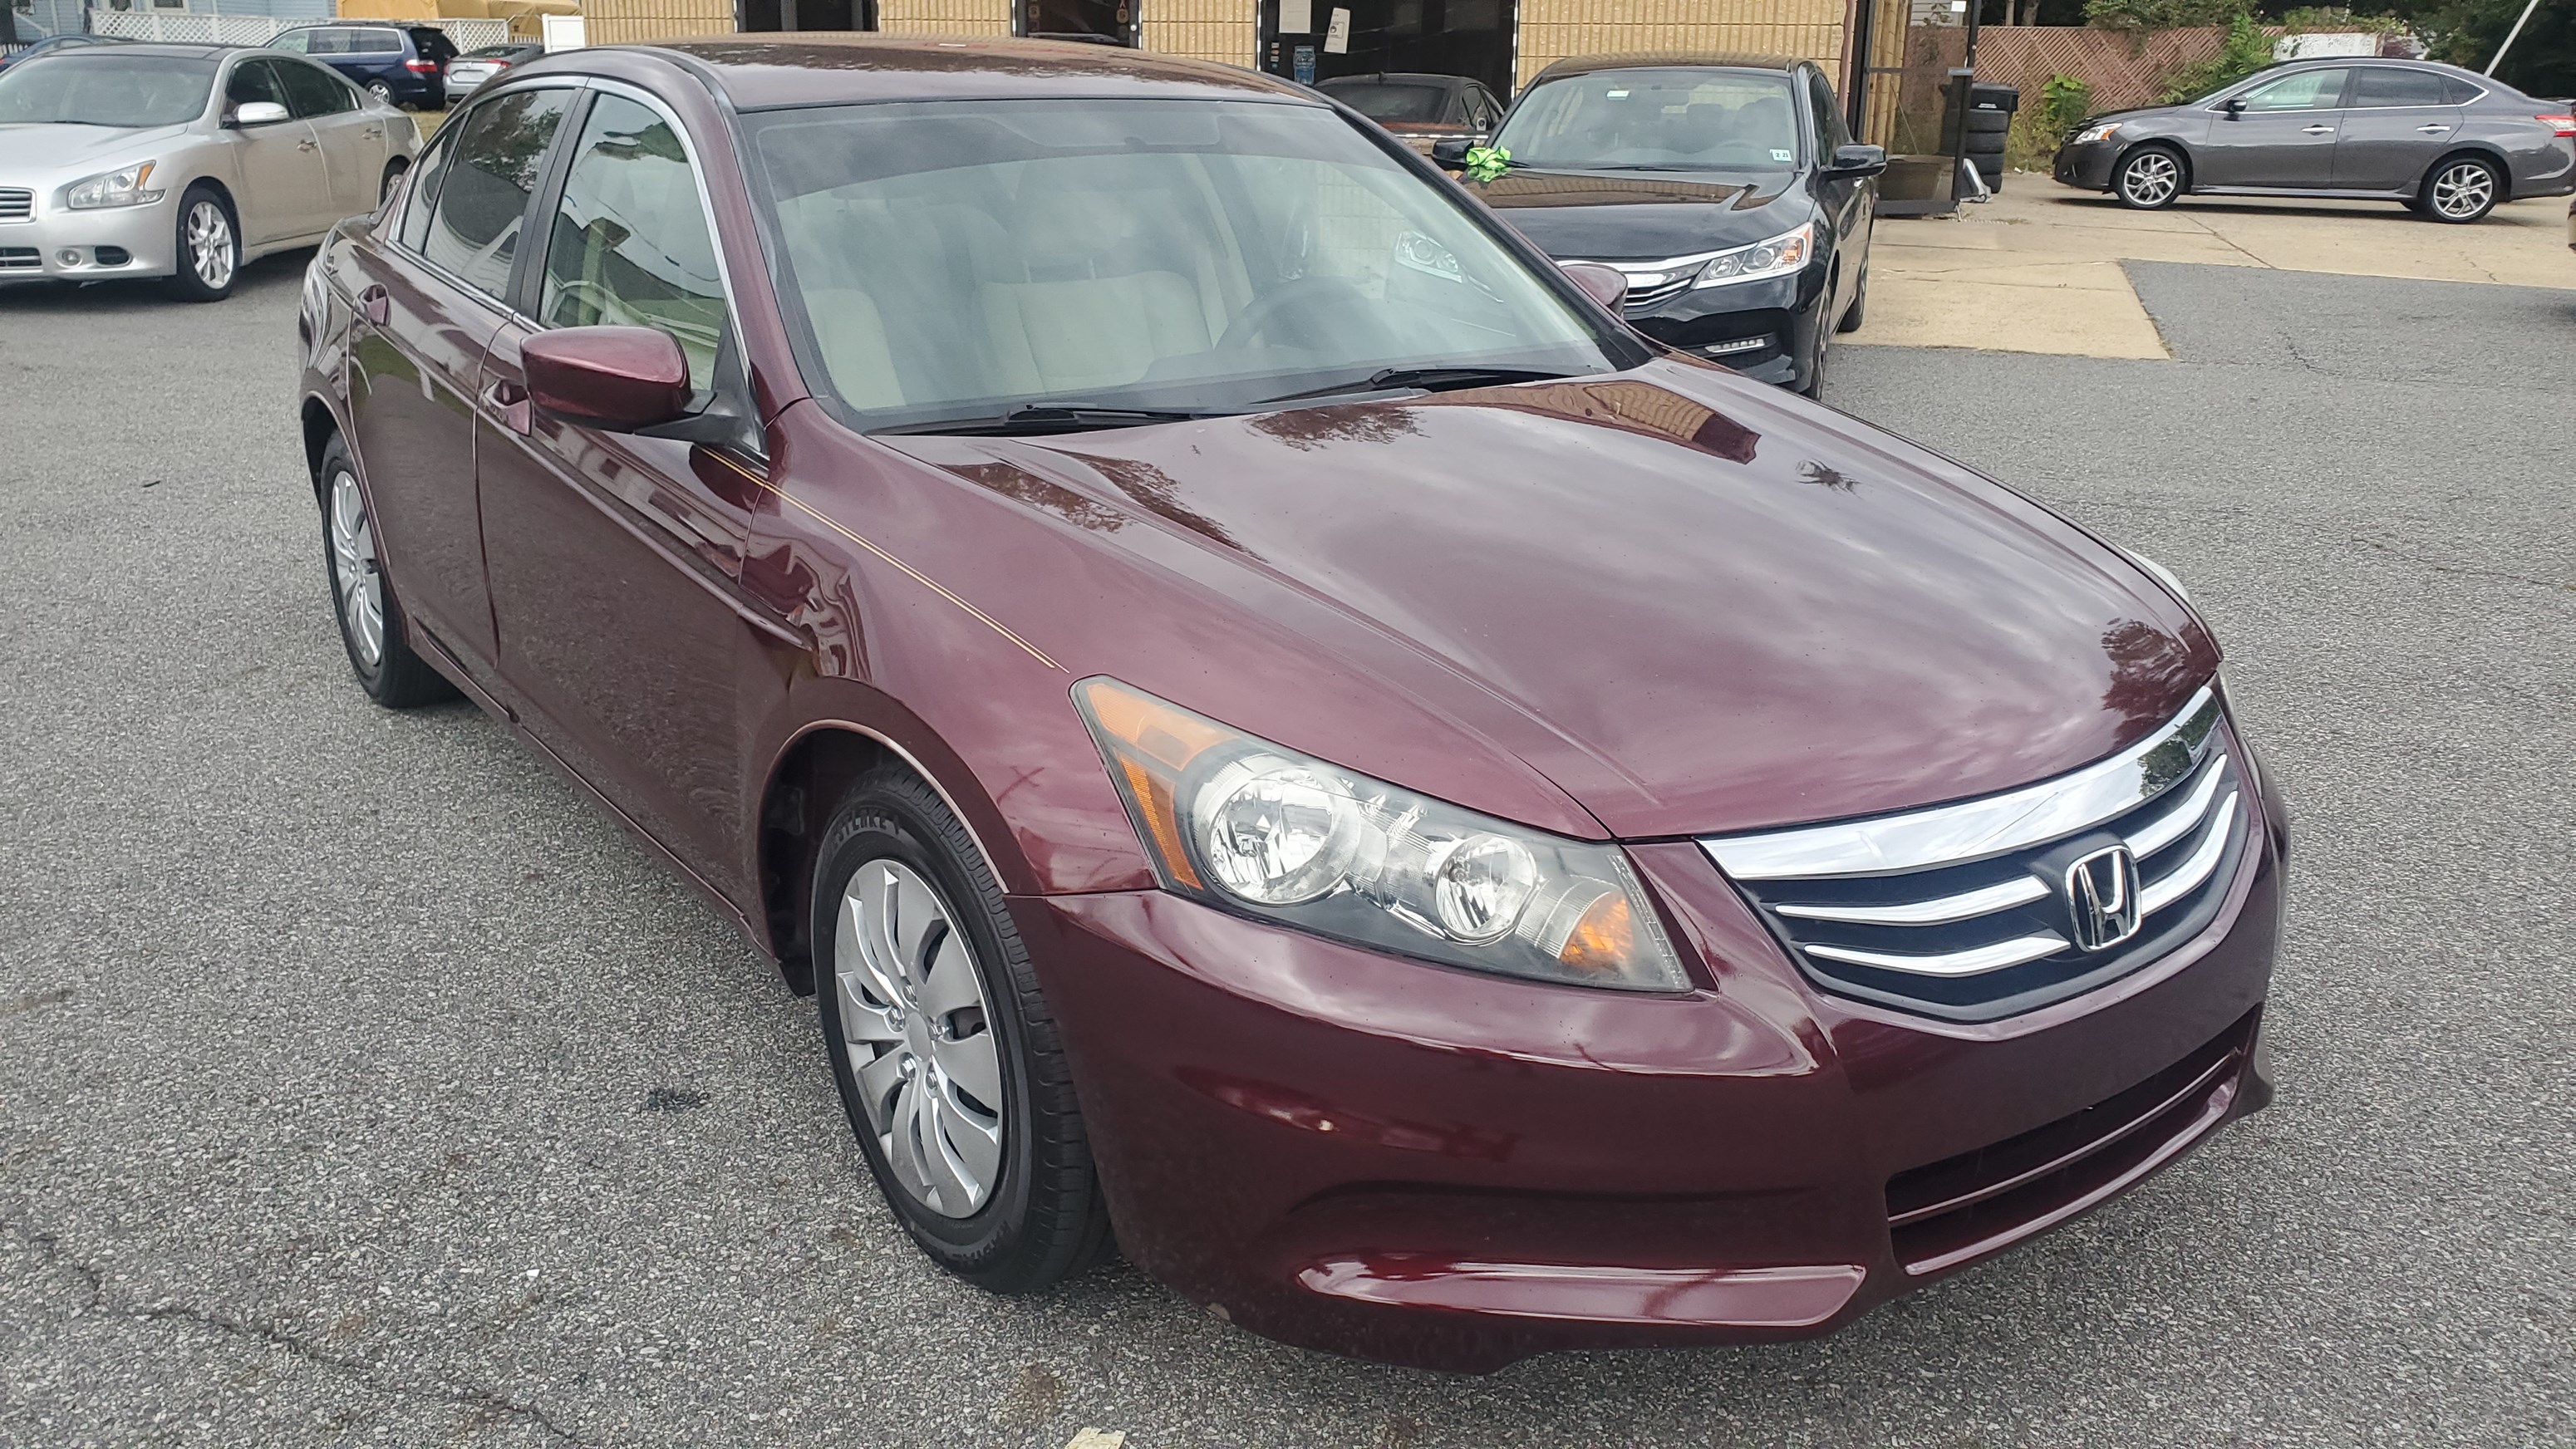 2012 HONDA ACCORD LX 2.4L 4-CYLINDER CLEAN CARFAX! NEW TIRES INSTALLED